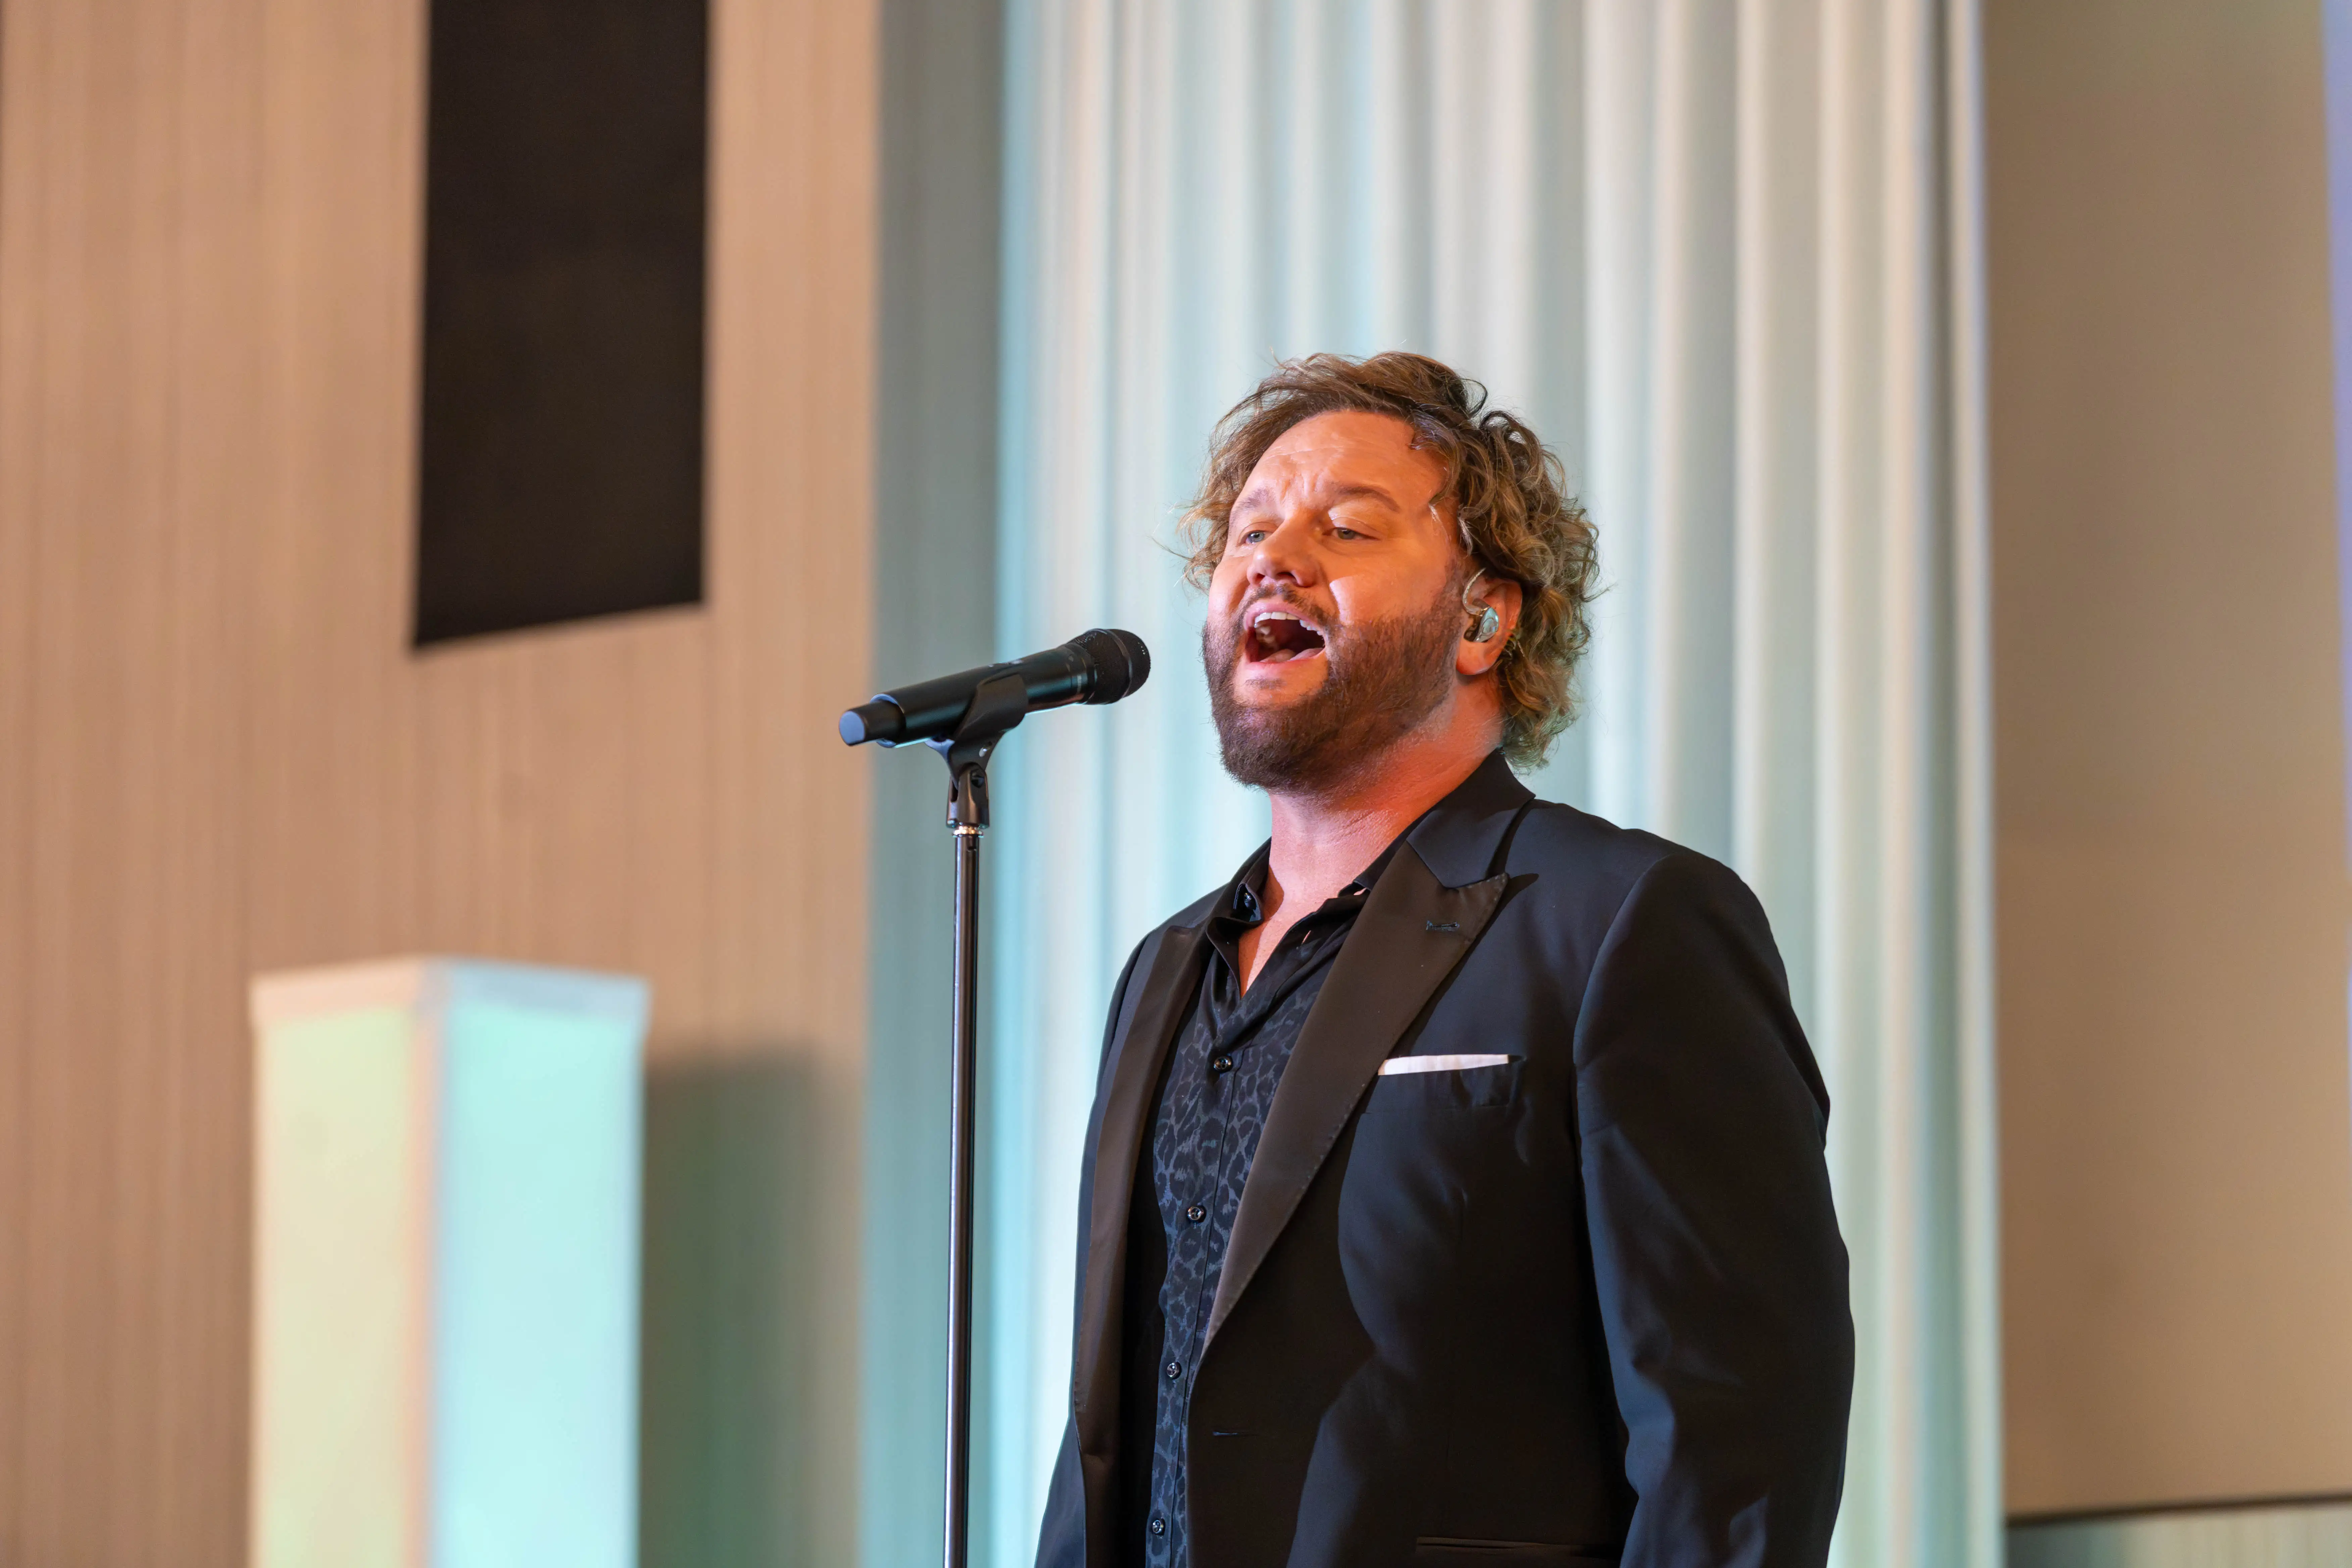 David Phelps performing for the guests